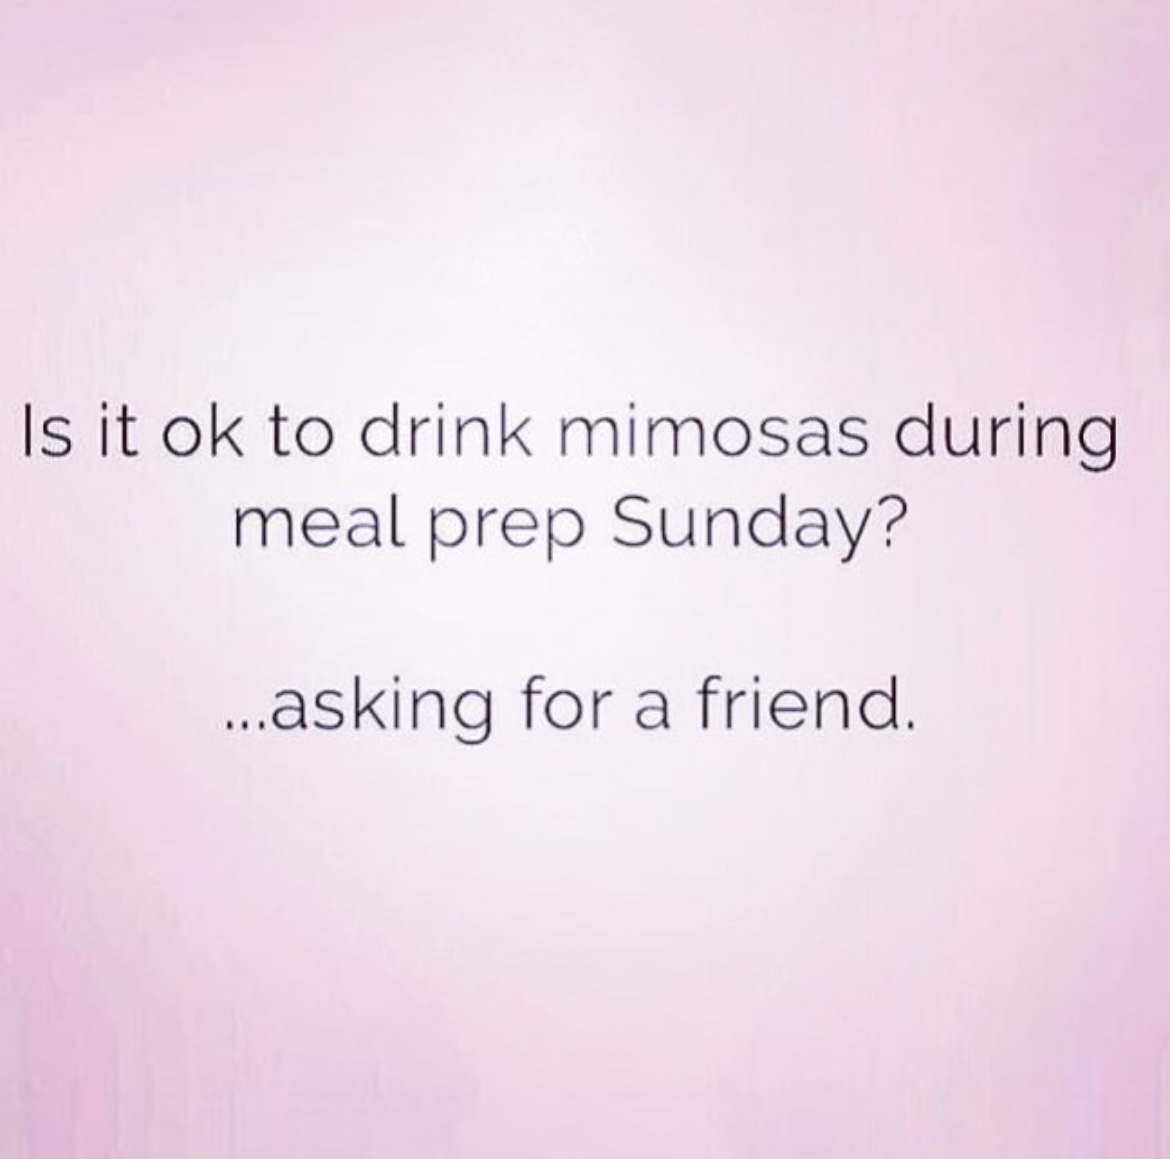 🍾 Sounds 'bout right!  Happy Sunday, Coiffeteria family!
.
.
.
.
.
.
.. #artprize #cascadeMi #downtownGrandRapids #GRfoodie #beercity #beercityUSA #bluebridge #GrandRapidsMI #GrandRapids #GrandRapidsBride #GrandRapidsbride #bridalhair #WestMichigan #Westside #downtownGrandRapids